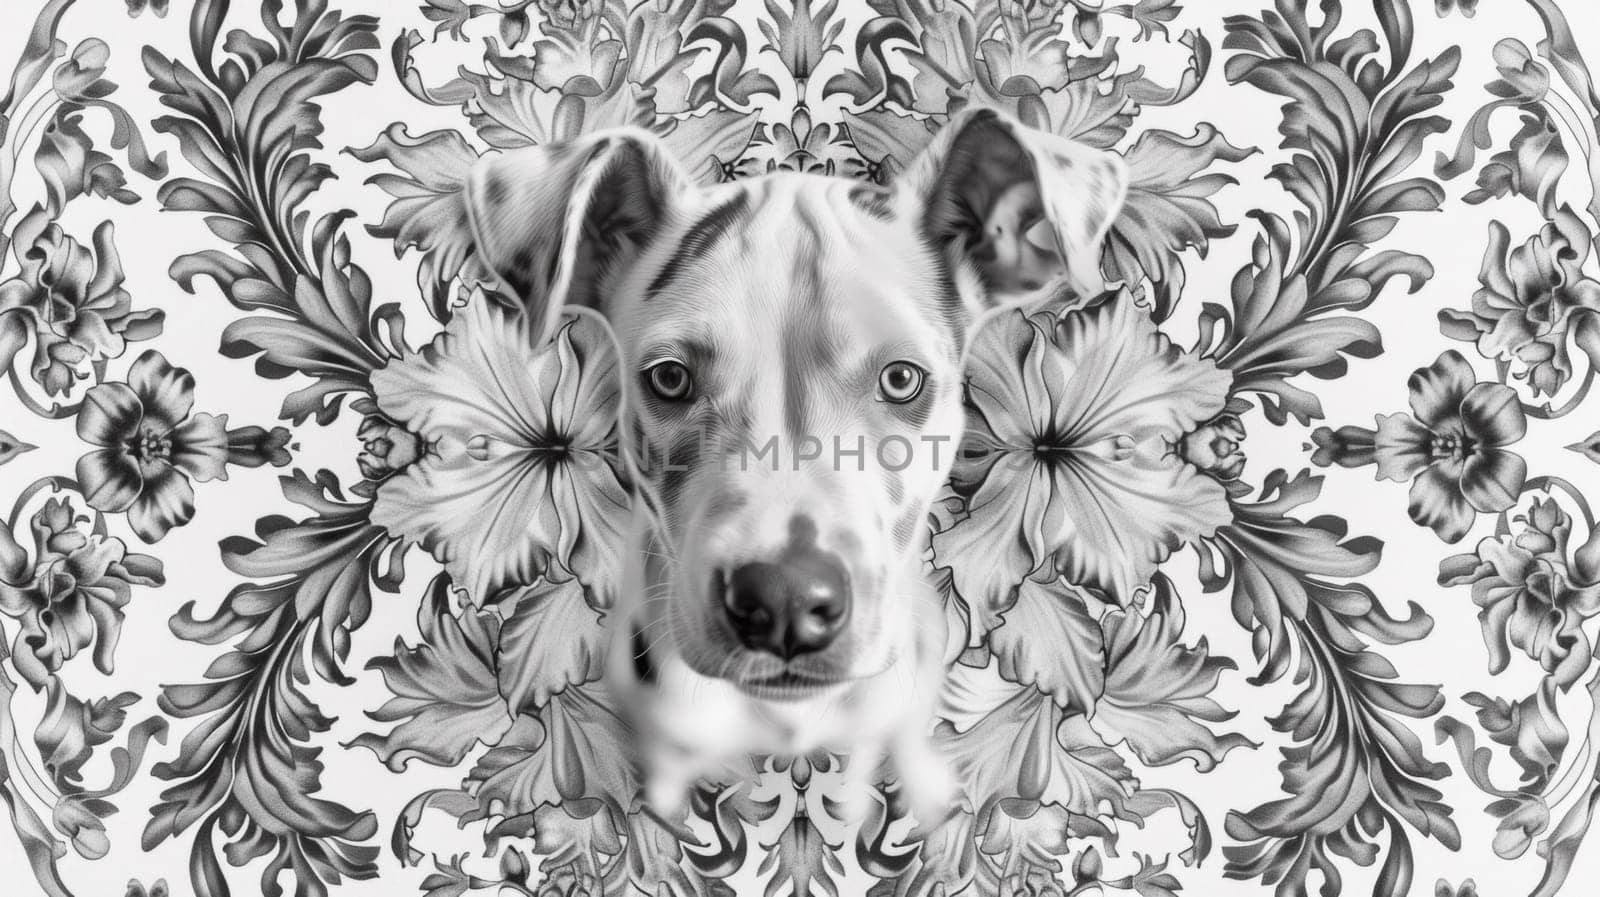 A dog is in a floral pattern on the black and white photo